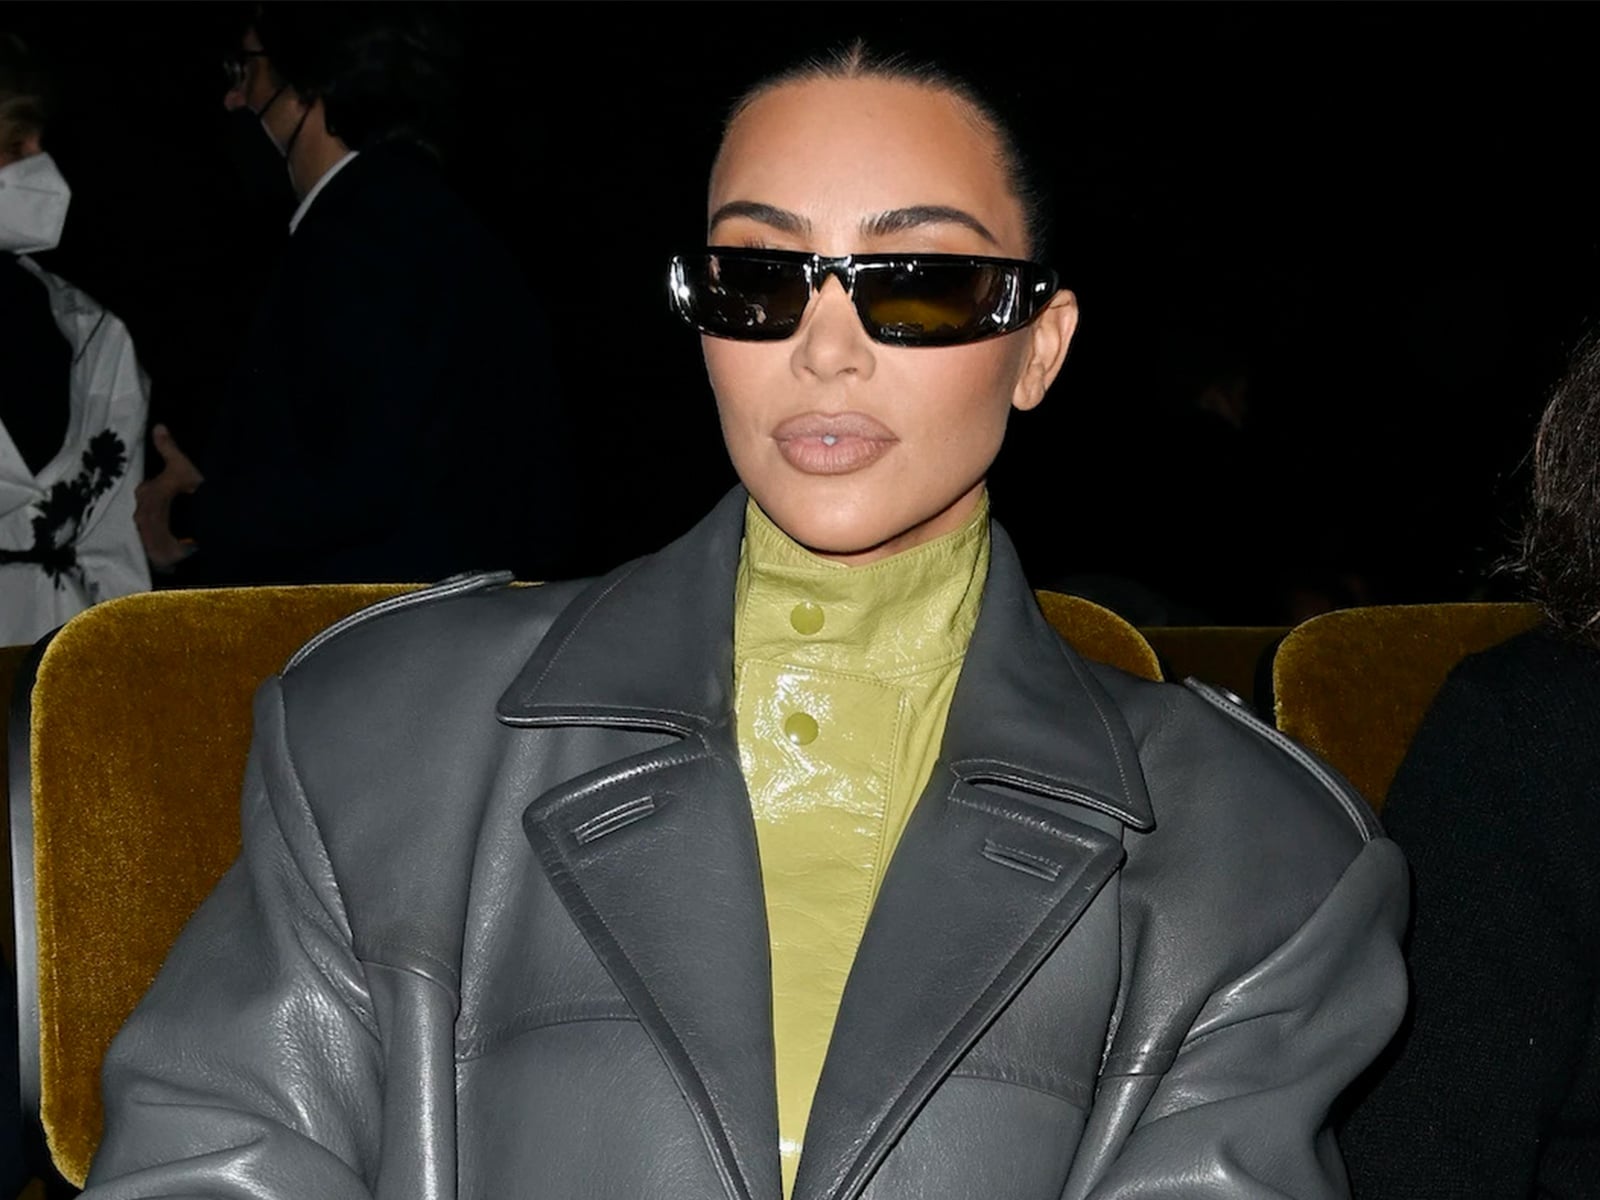 Here’s Kim Kardashian’s best advice for women who want to succeed